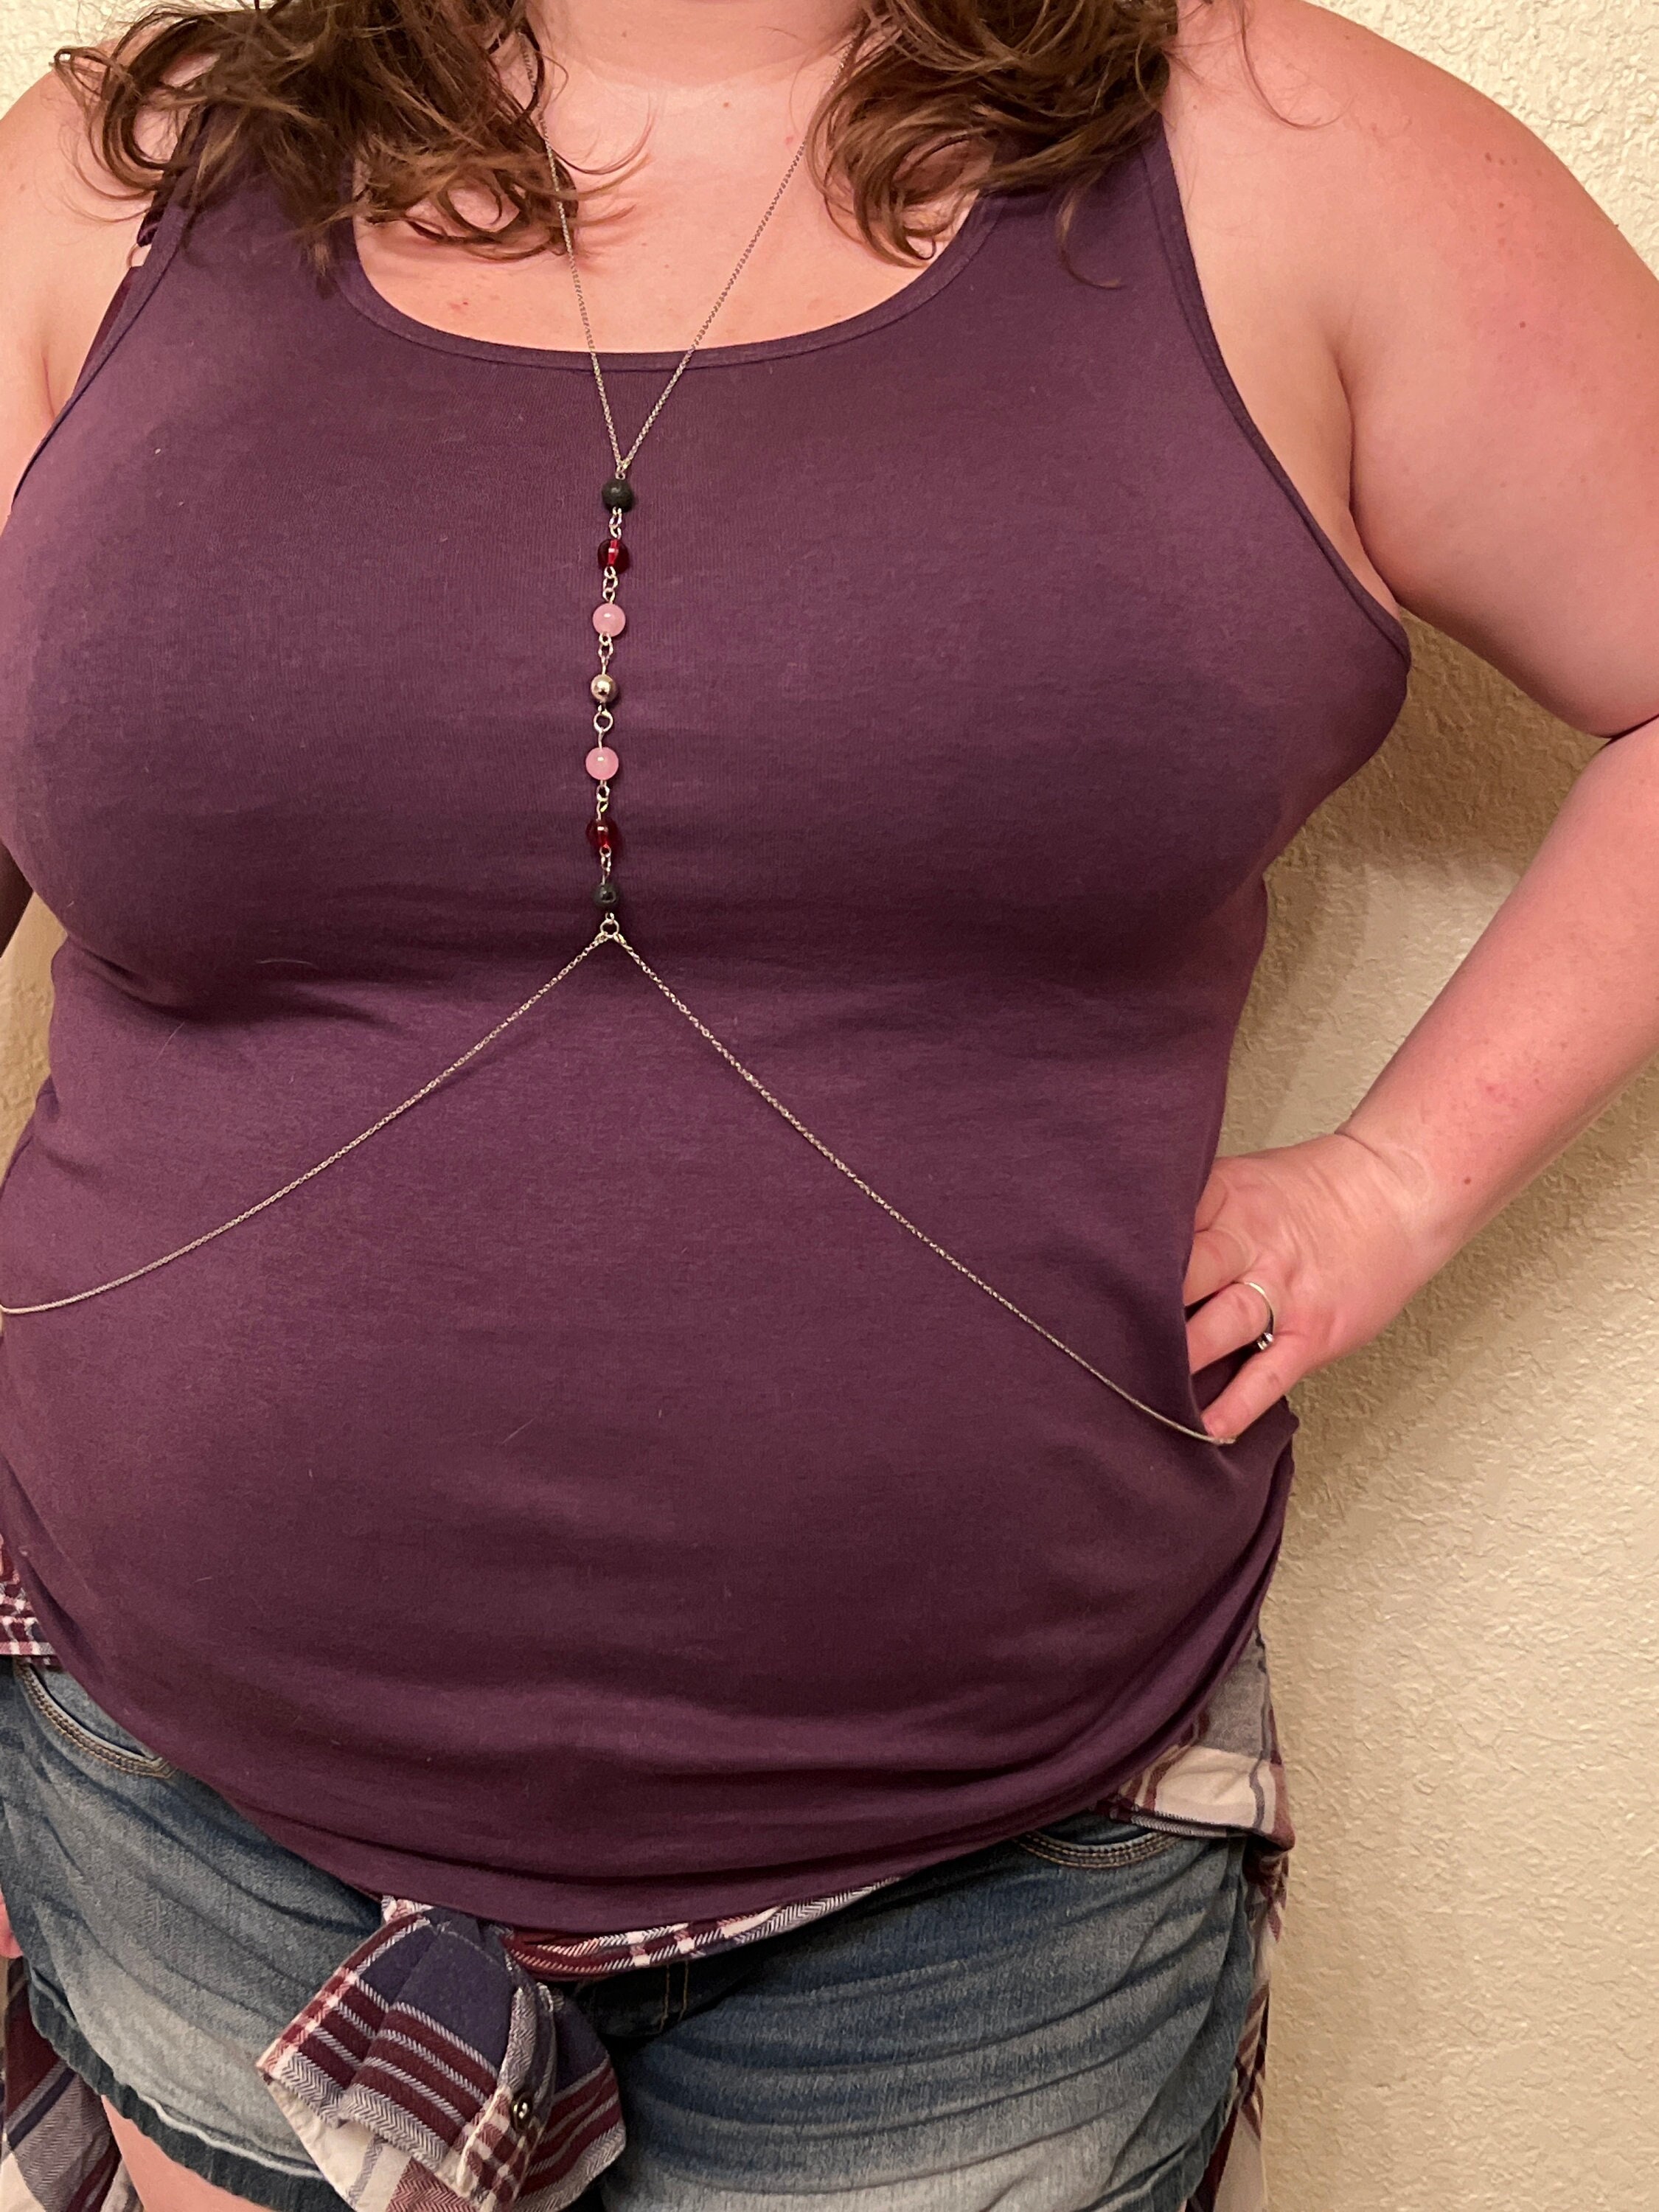 Plus Size Belly Chain 